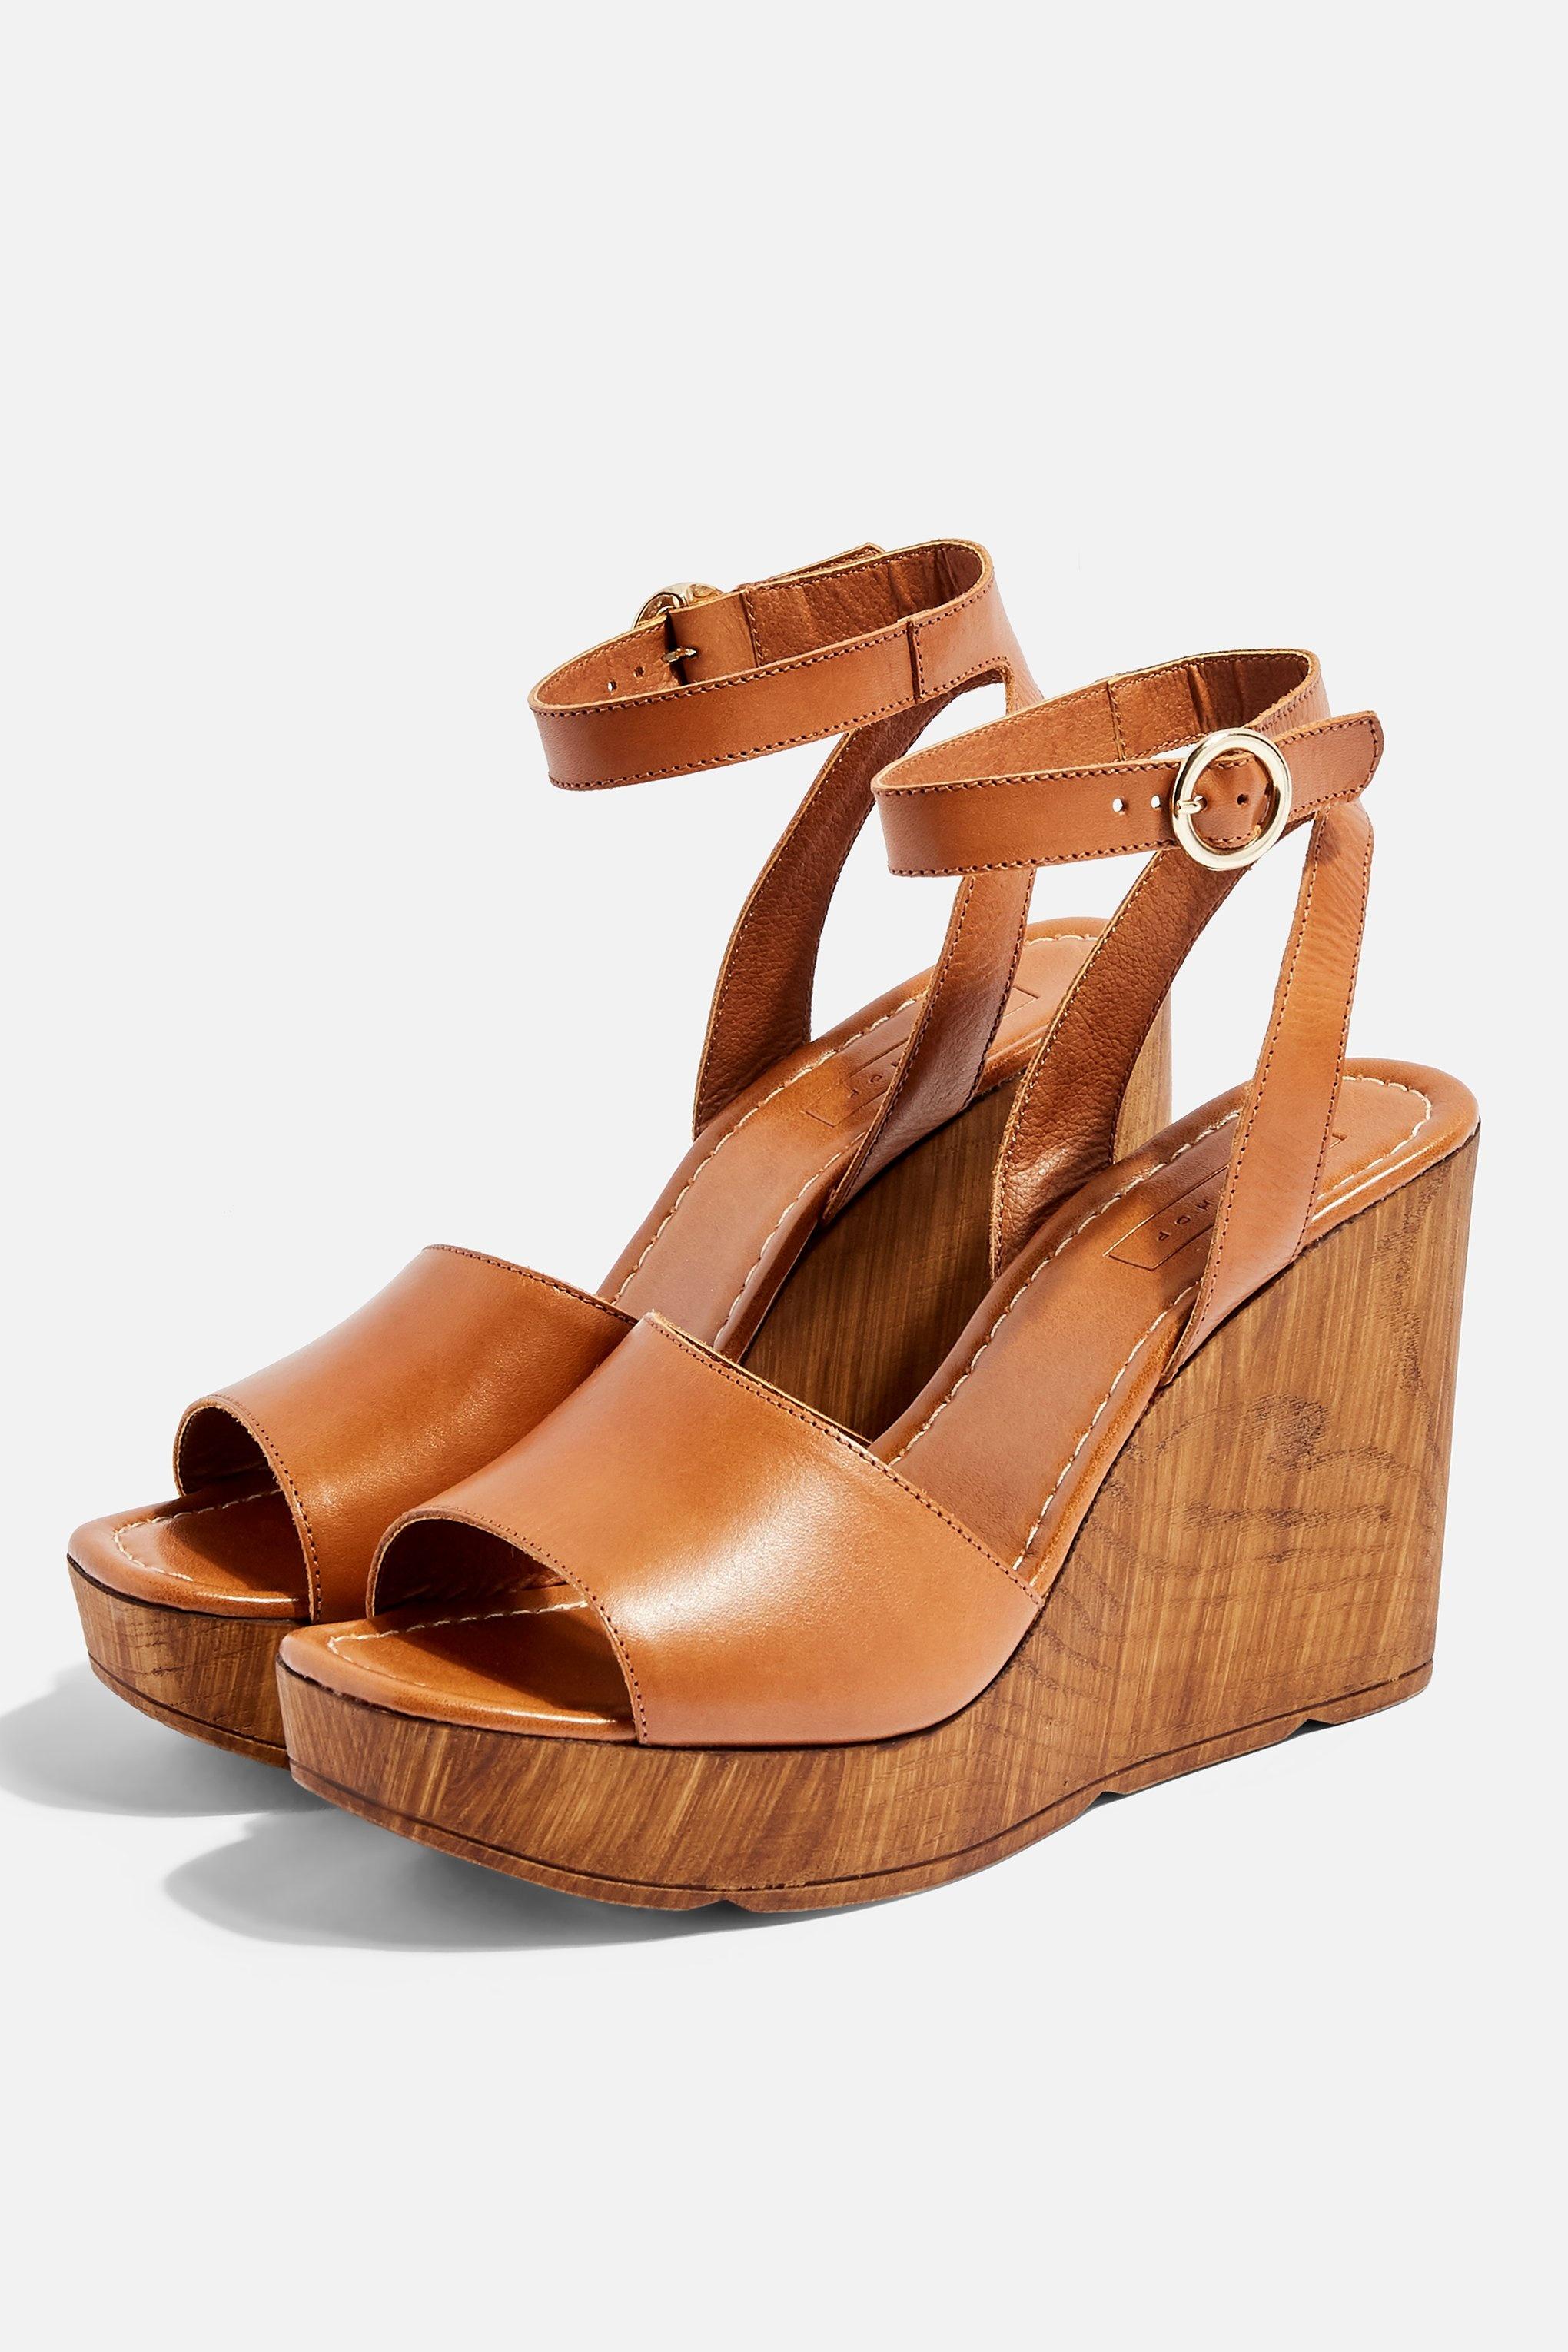 TOPSHOP Leather Wander Tan Wedges in 